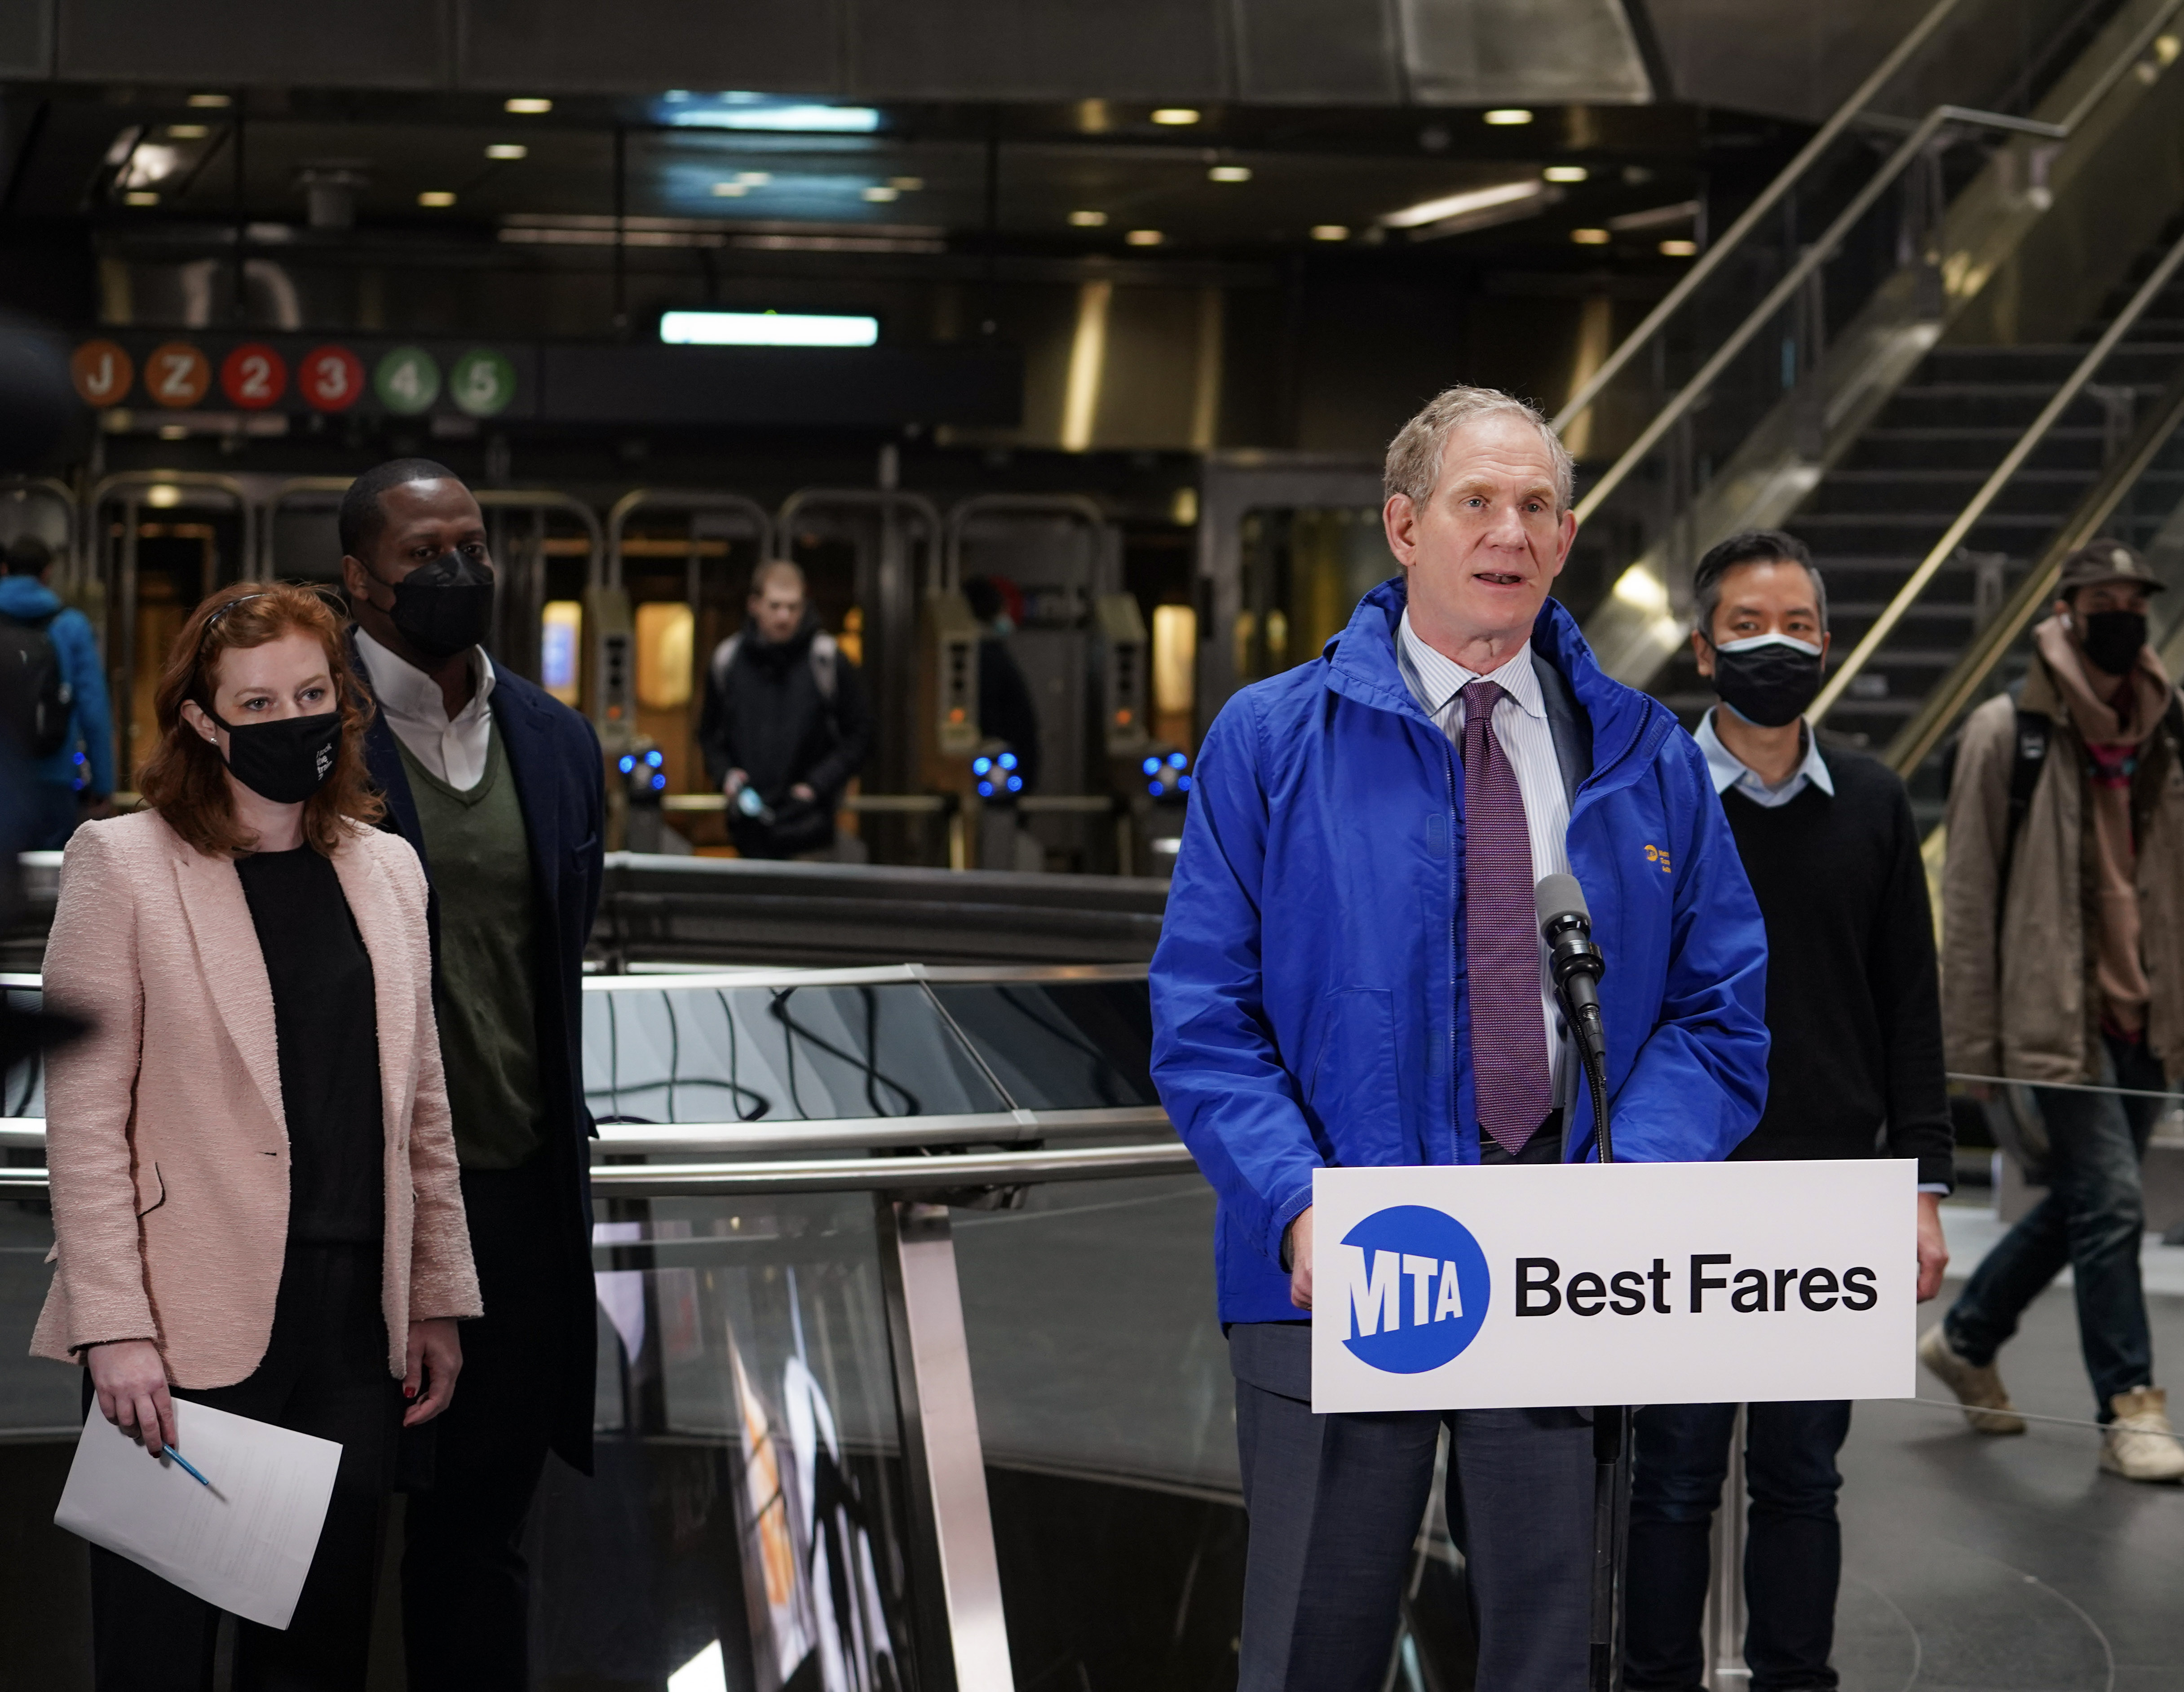 MTA Fare Change Pilot to Begin at End of Month